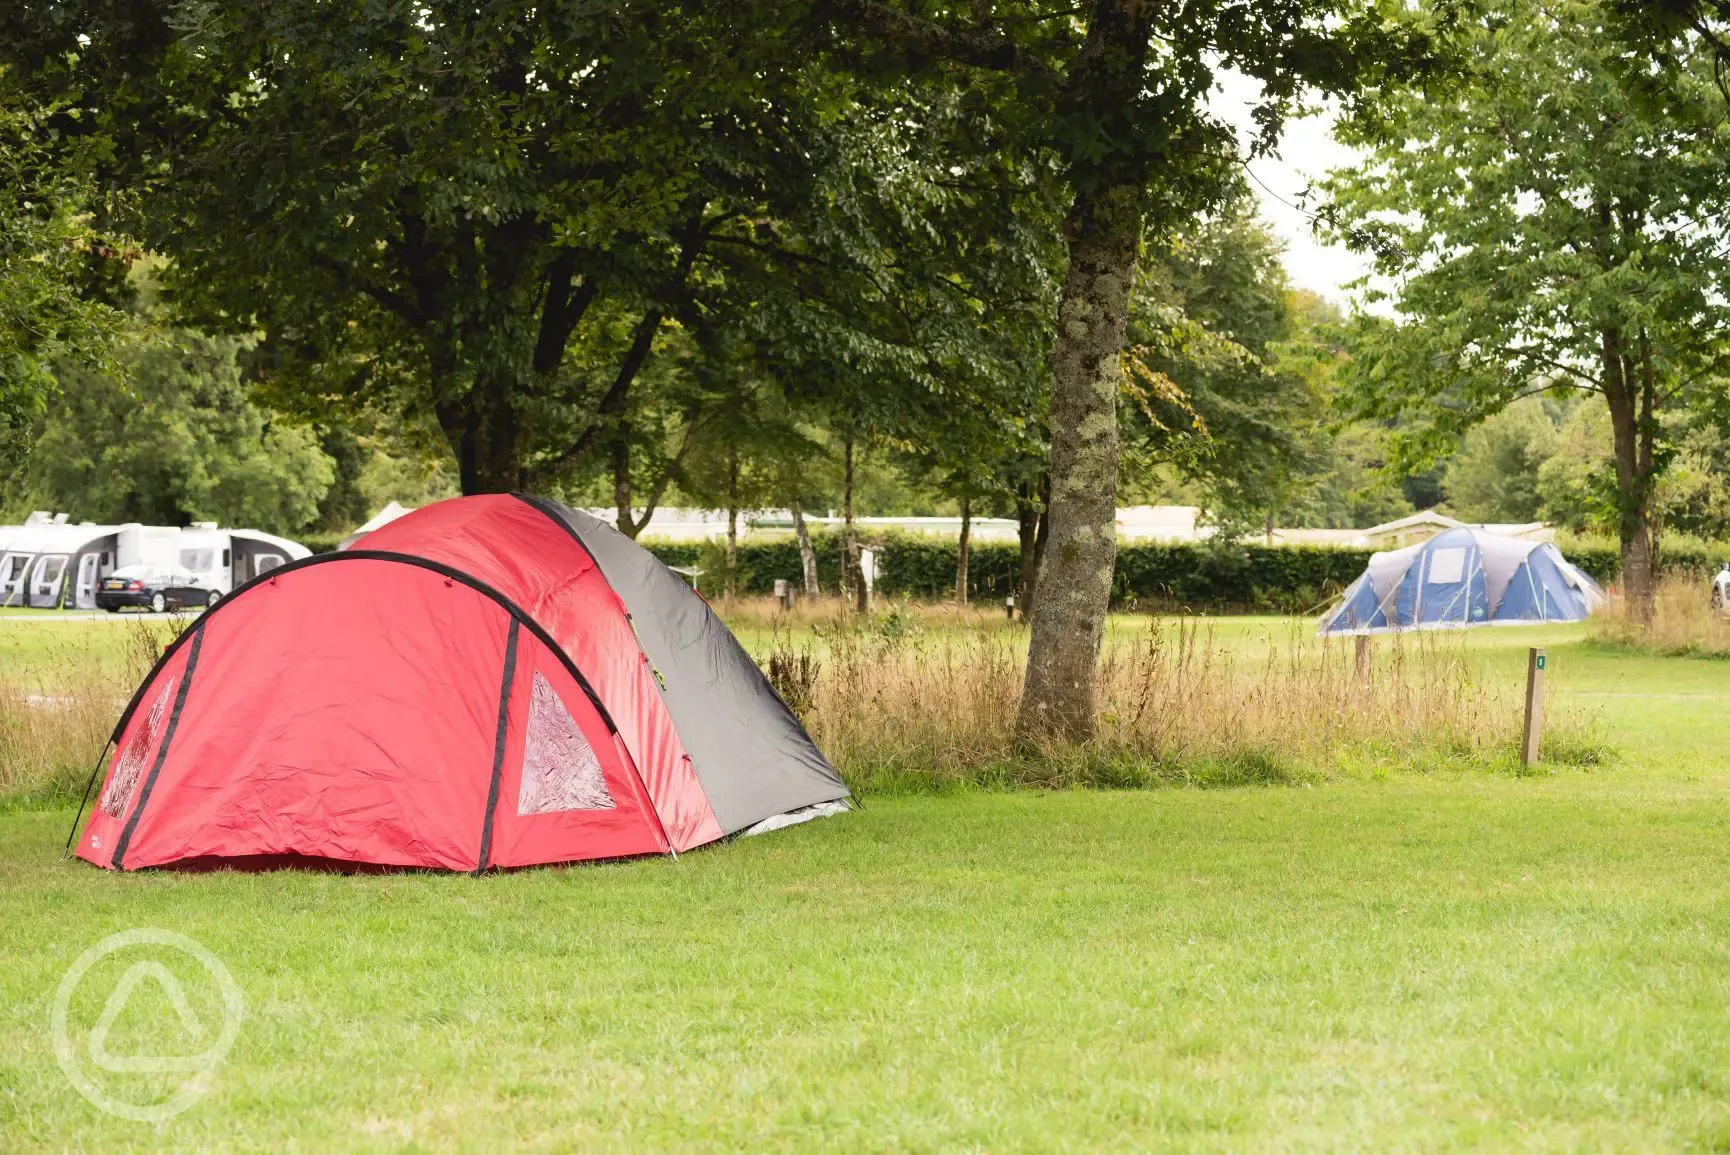 Grass pitch with tent